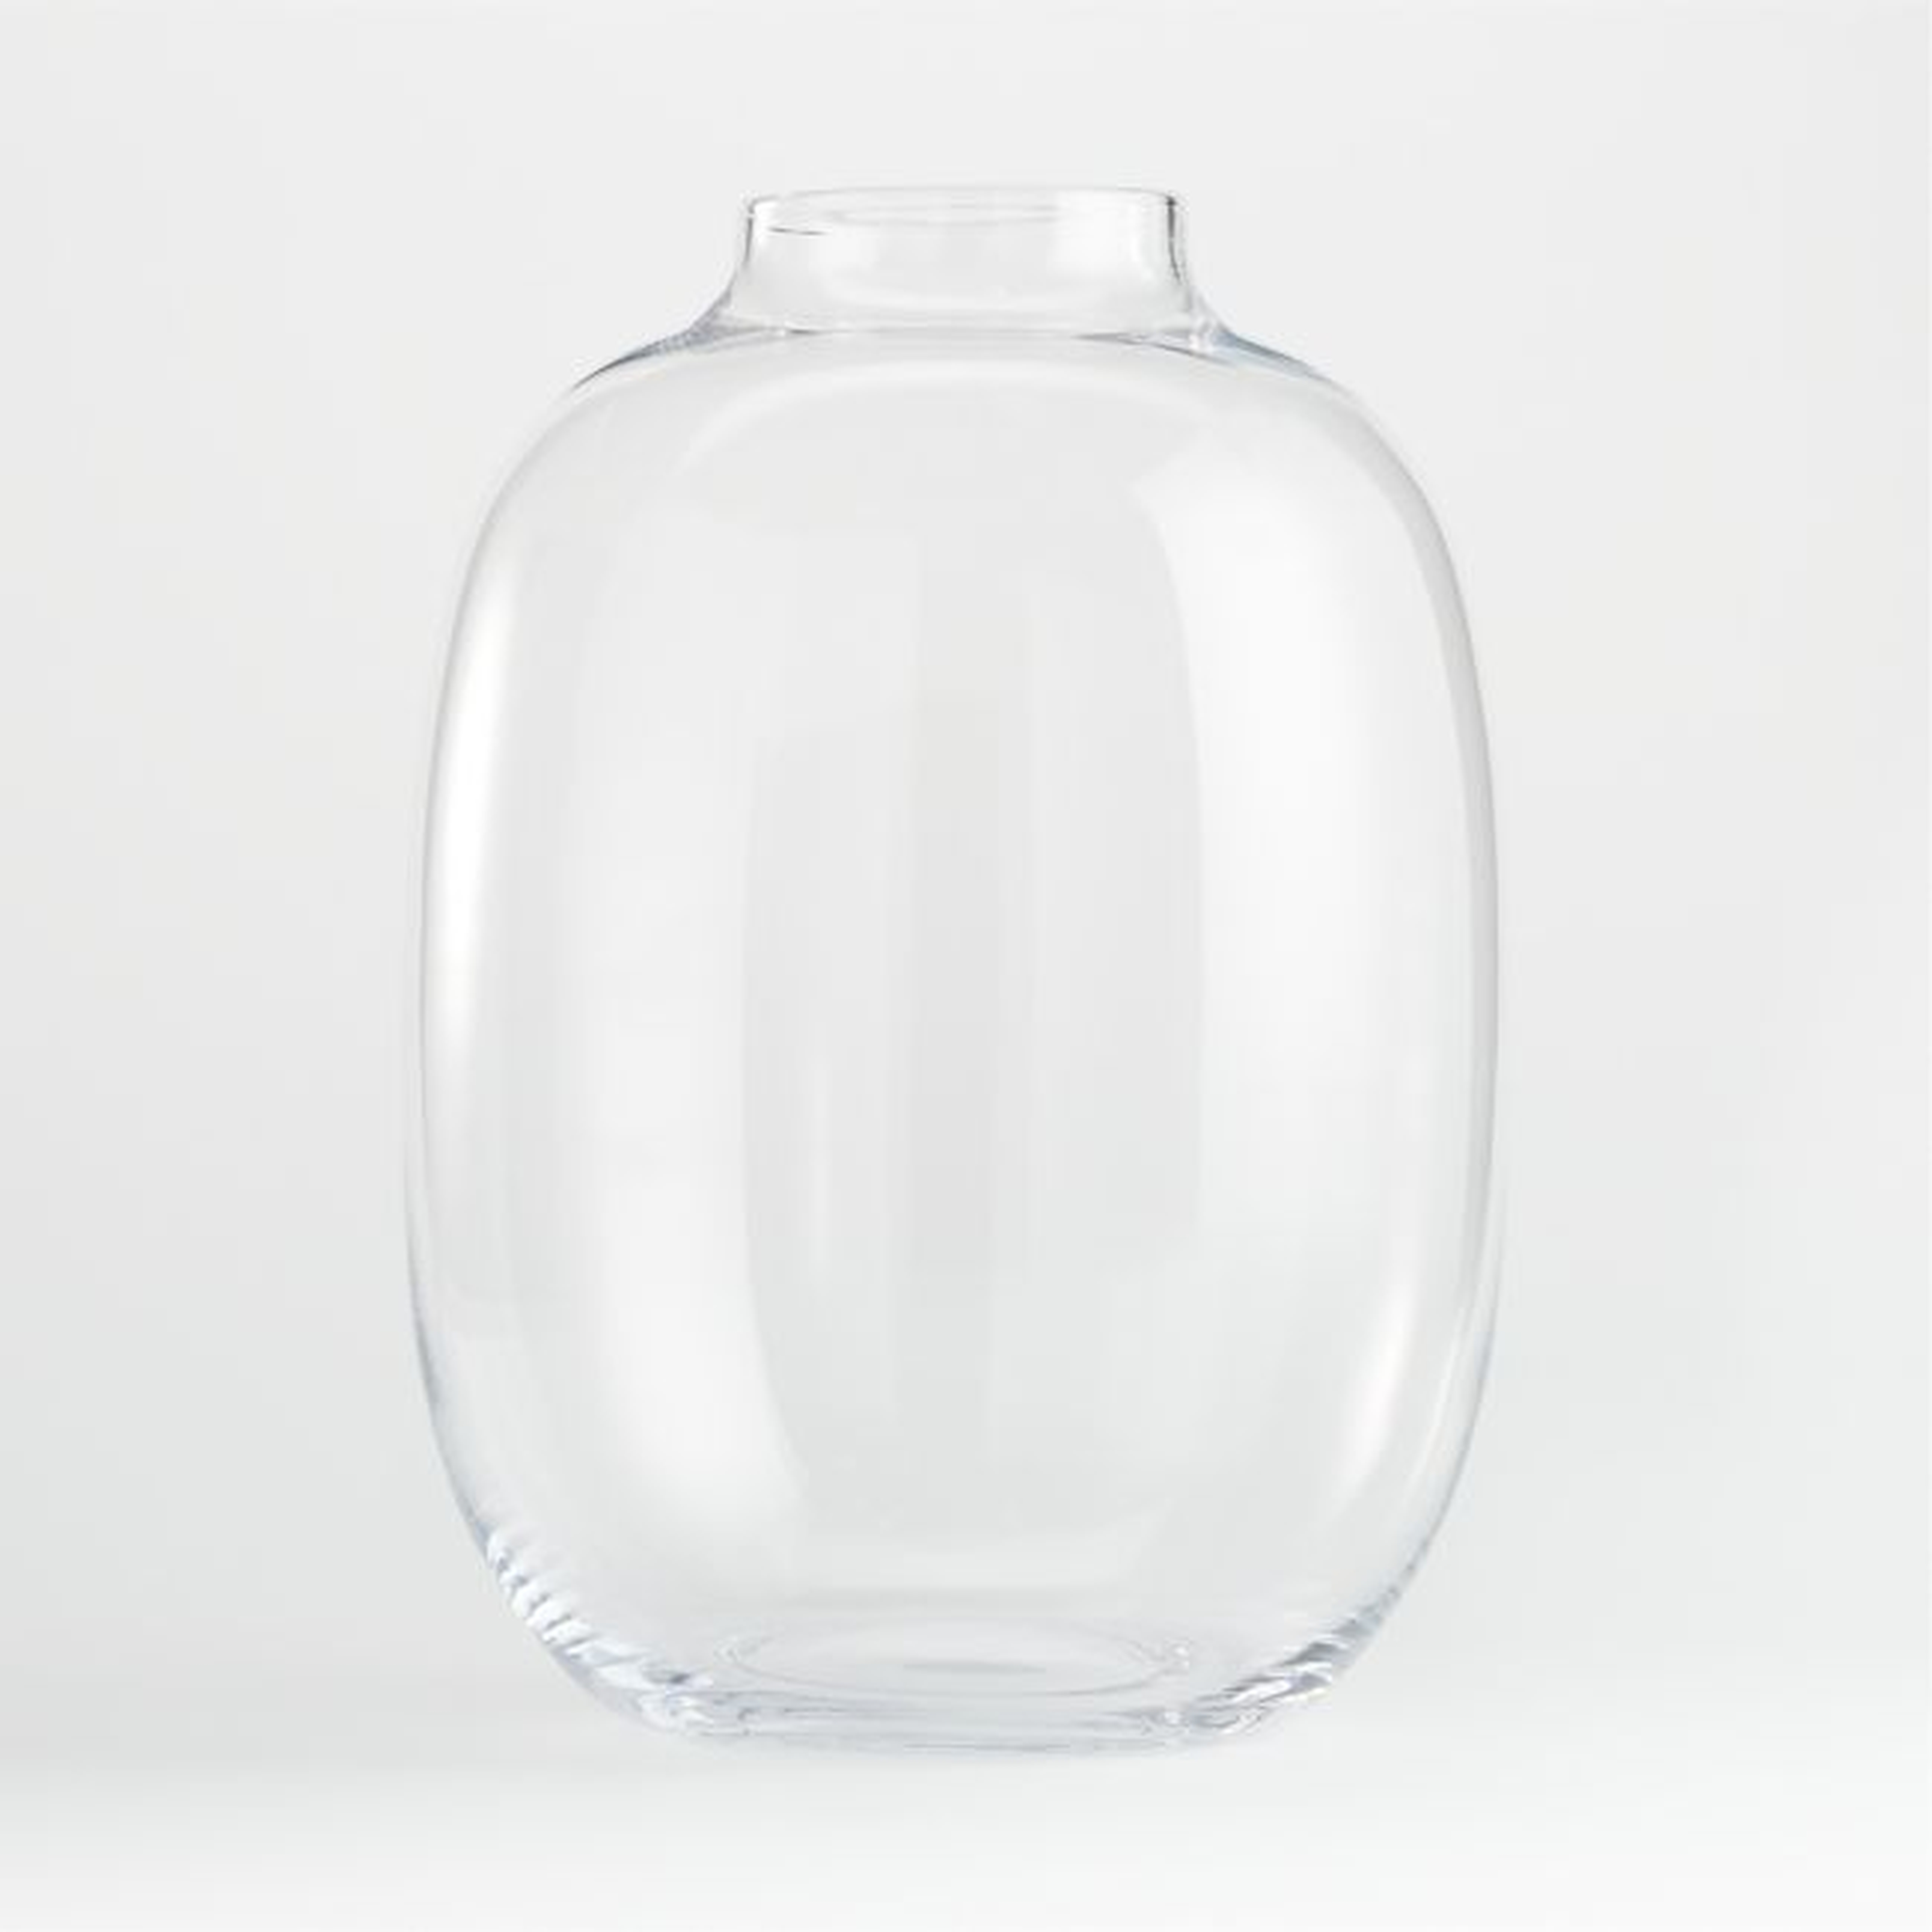 Laurel Round Clear Vase 16" - Crate and Barrel